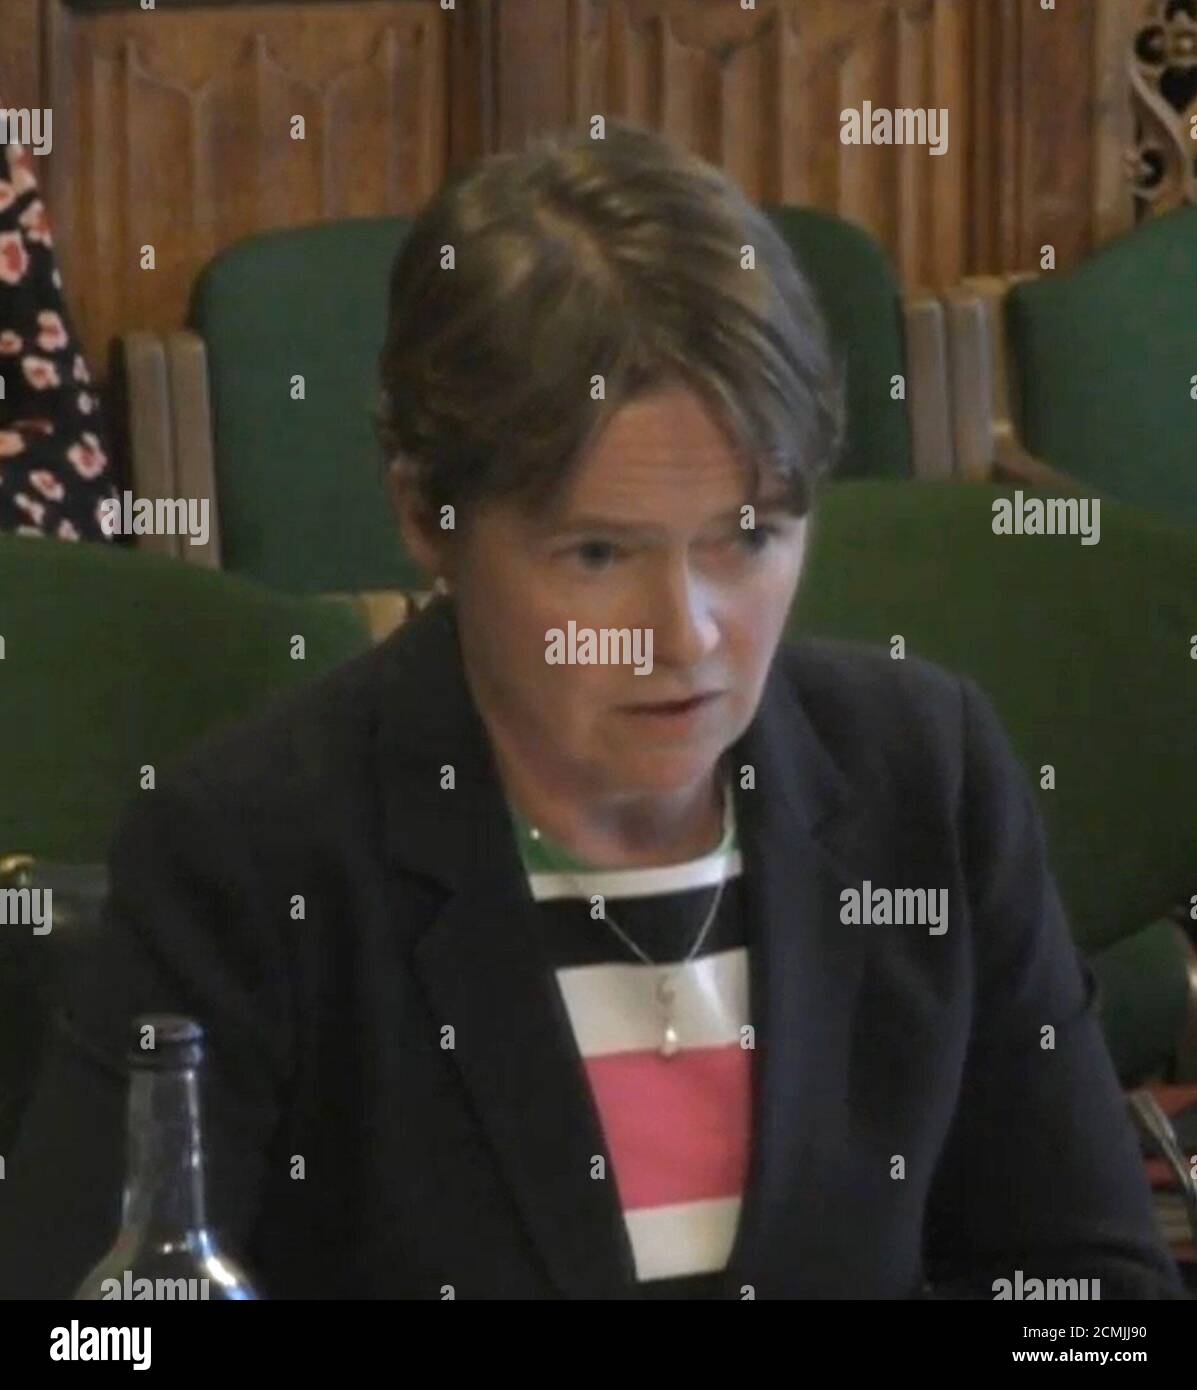 Screen grab of Baroness Dido Harding, Executive Chair of NHS Test and Trace Science giving evidence to the Commons Science and Technology Committee ,in the House of Commons, London, on UK testing capacity after Prime Minister Boris Johnson admitted there is not enough capacity in the testing system after demand 'massively accelerated' in recent weeks. Stock Photo